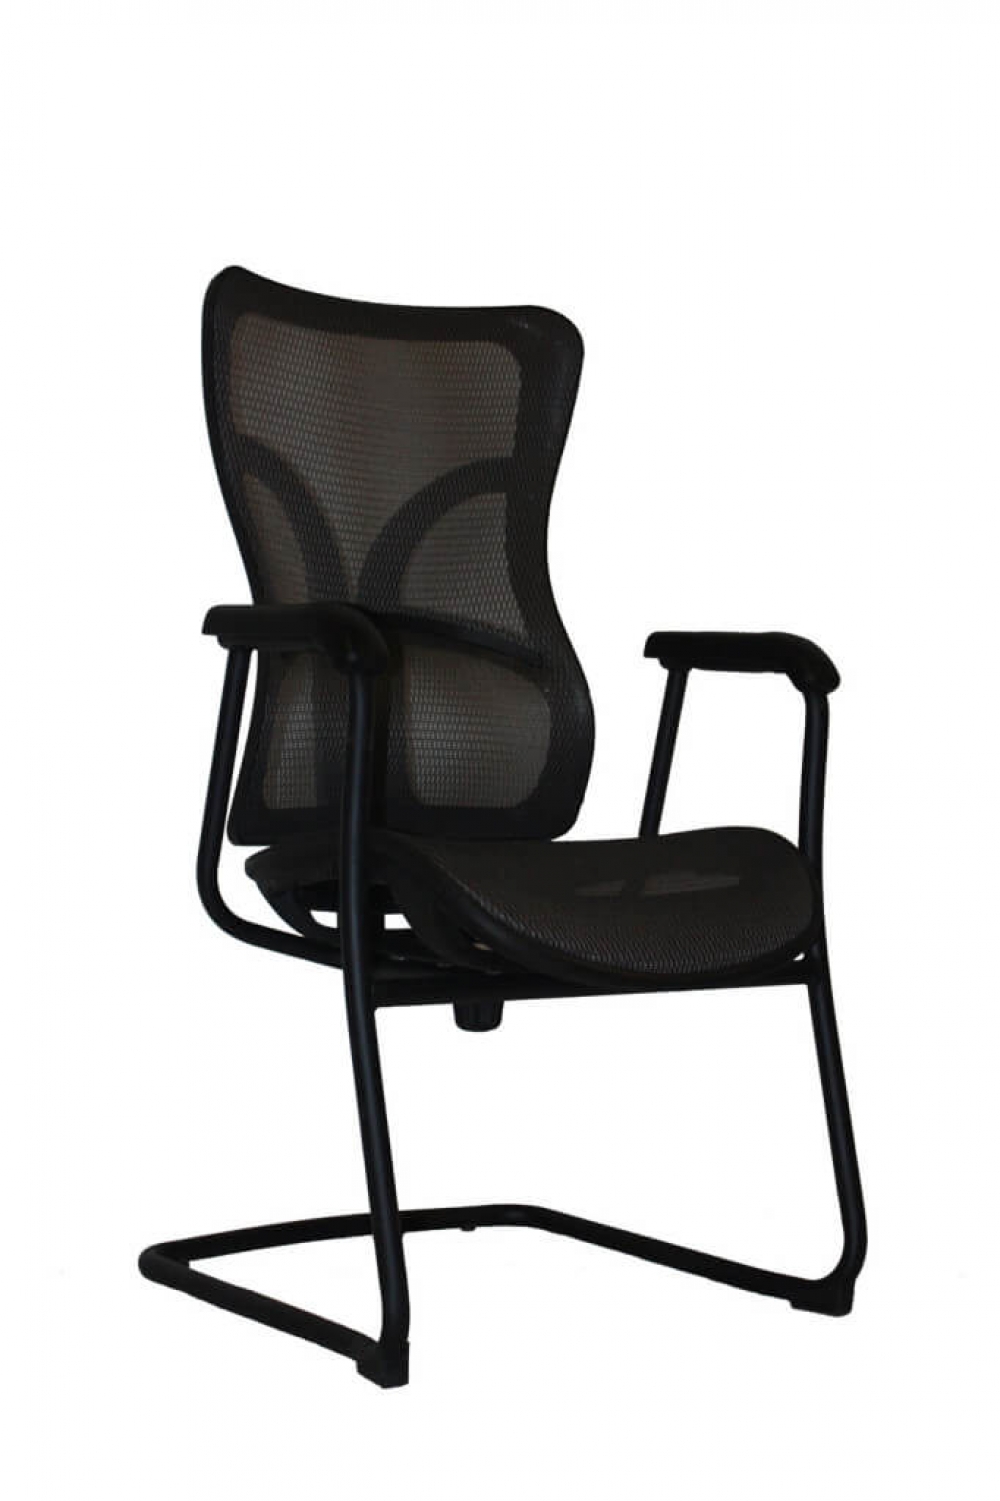 office-furniture-chairs-office-chairs-without-wheels.jpg